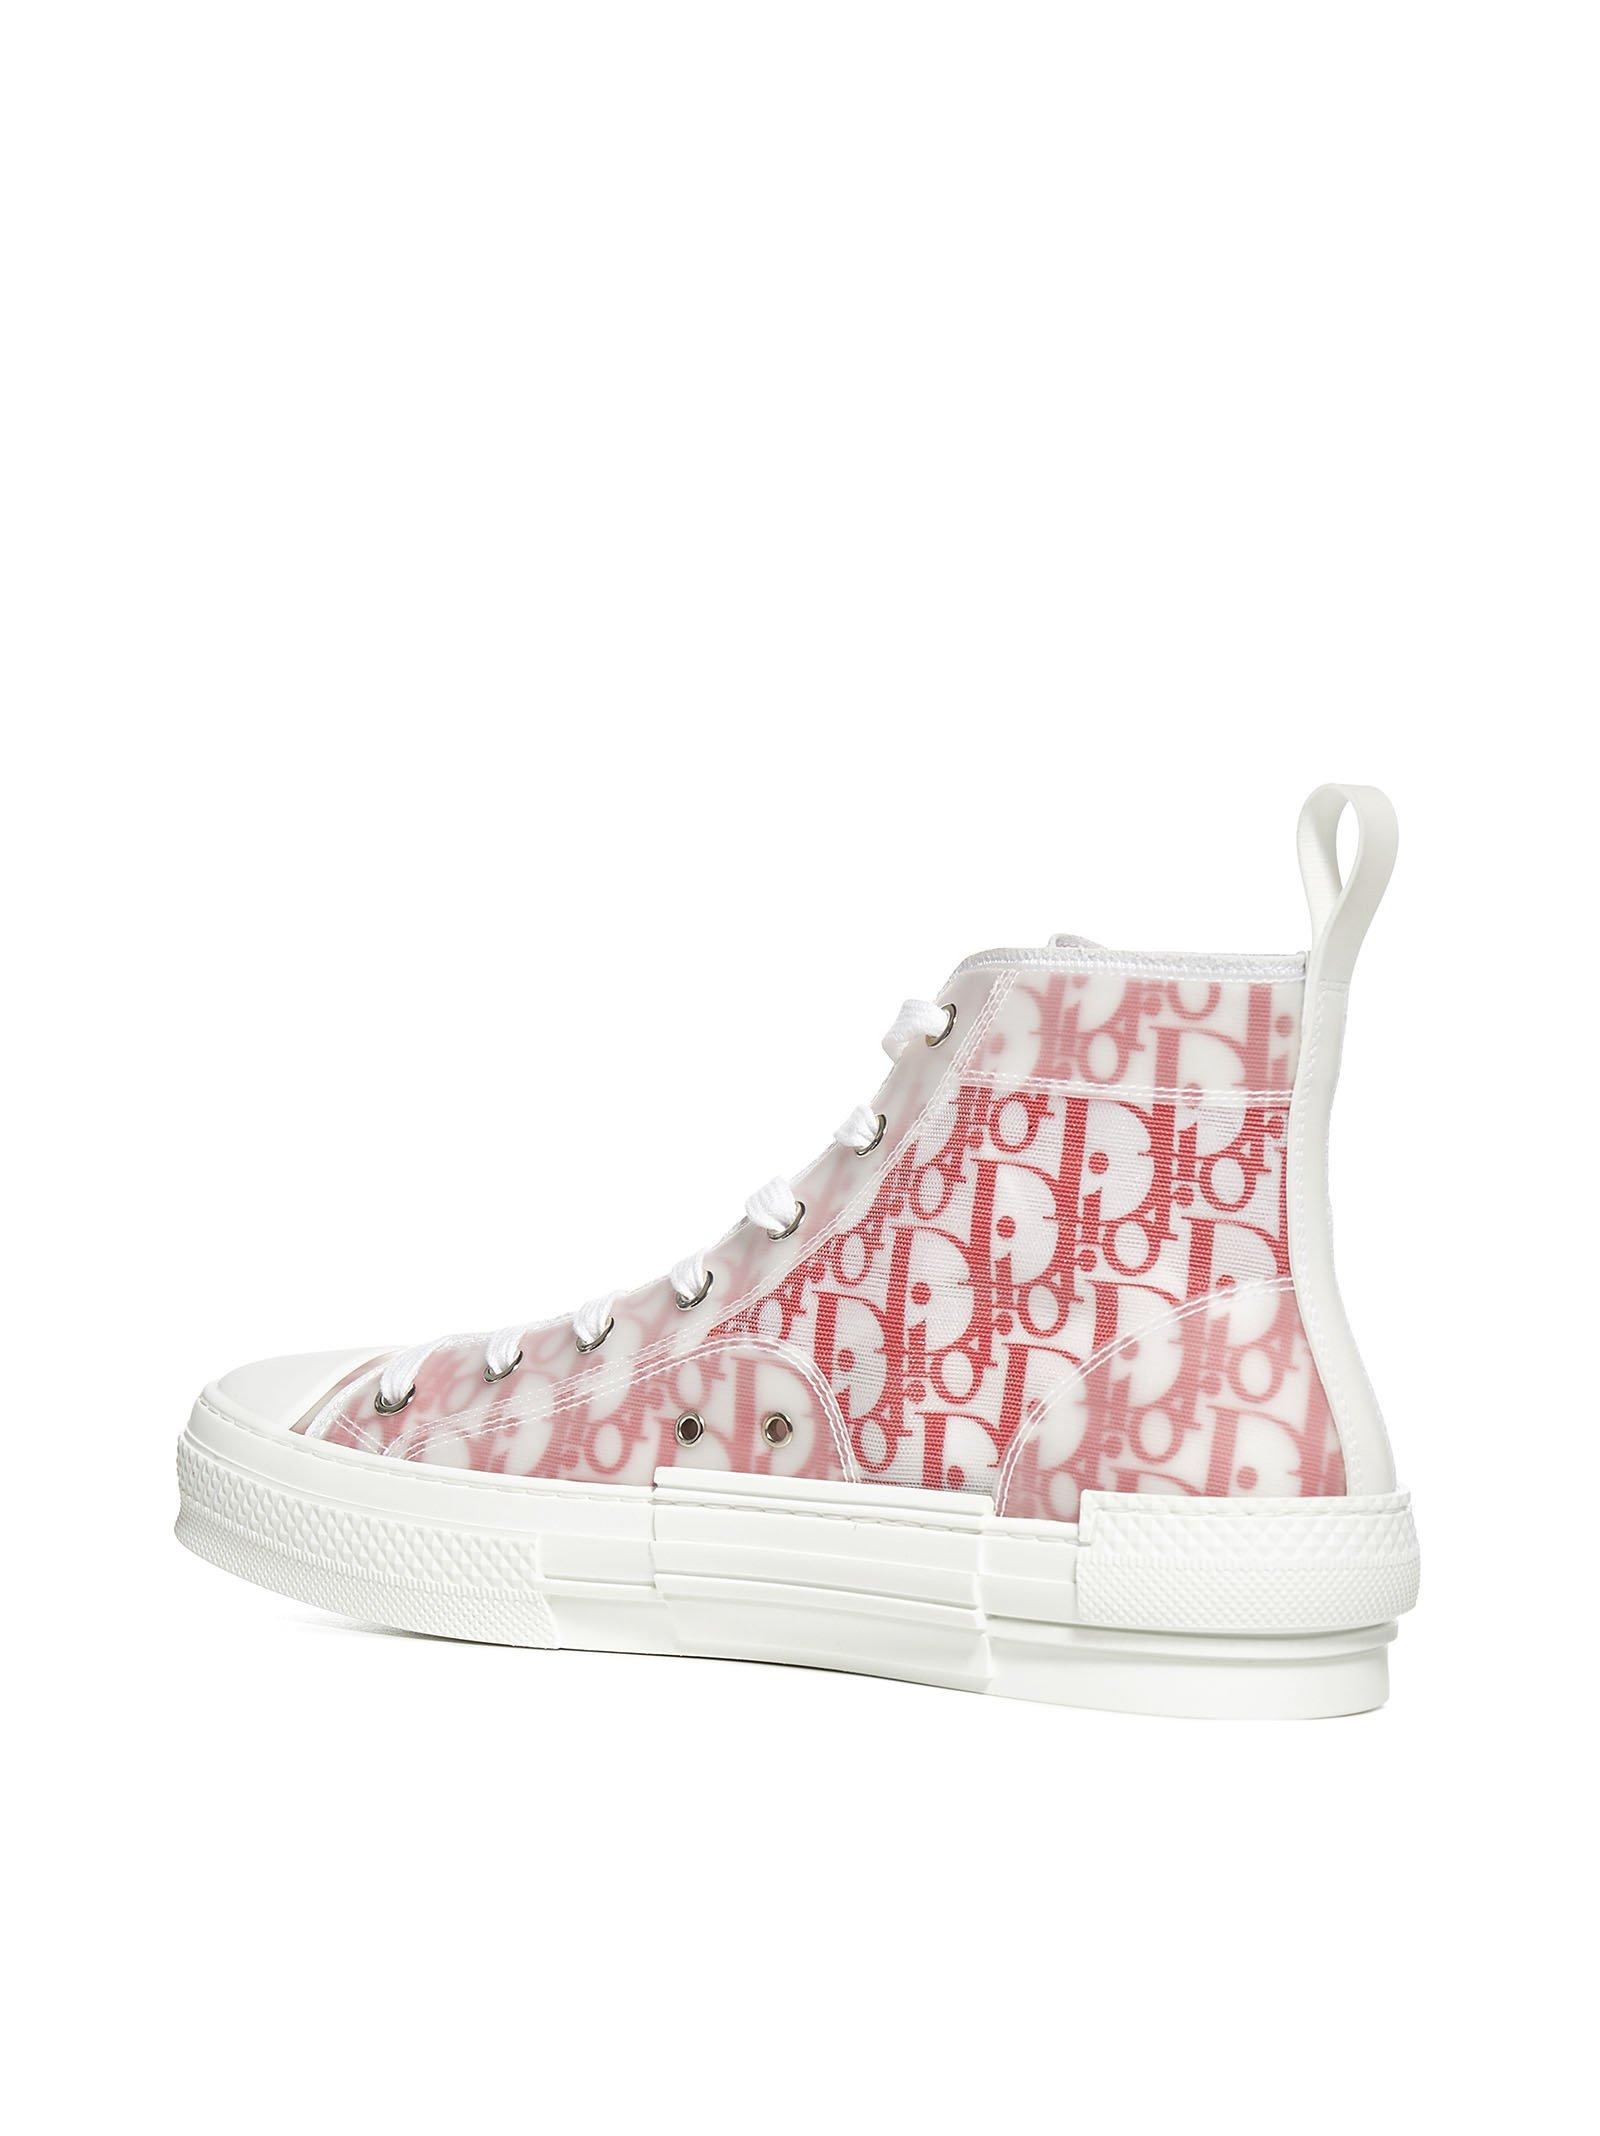 mercy Mastermind every time Dior Canvas B23 High-top Sneaker in Pink for Men | Lyst